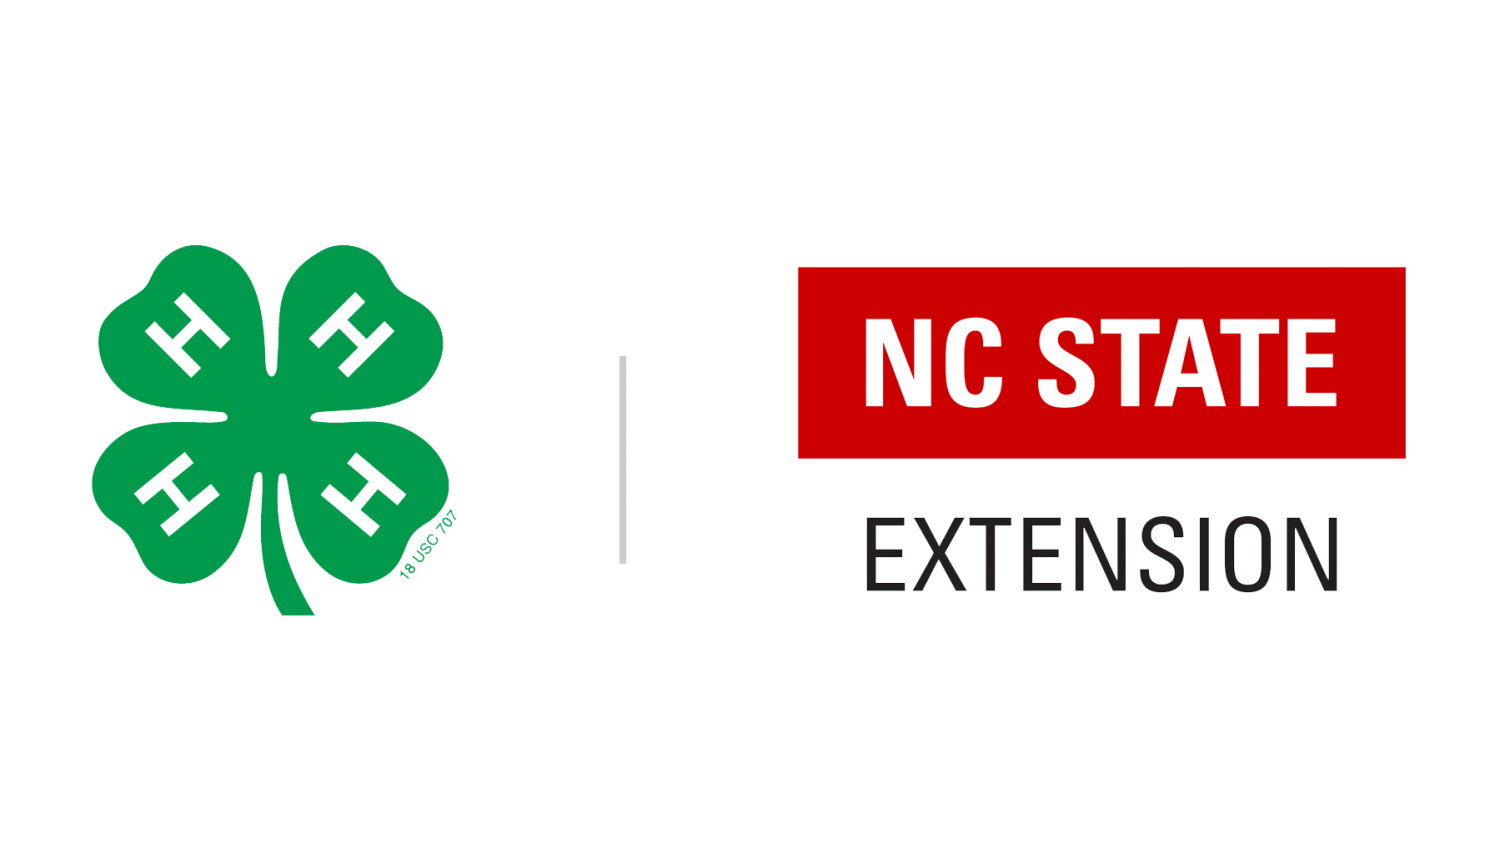 NC State Extension and 4-H logos paired side by side